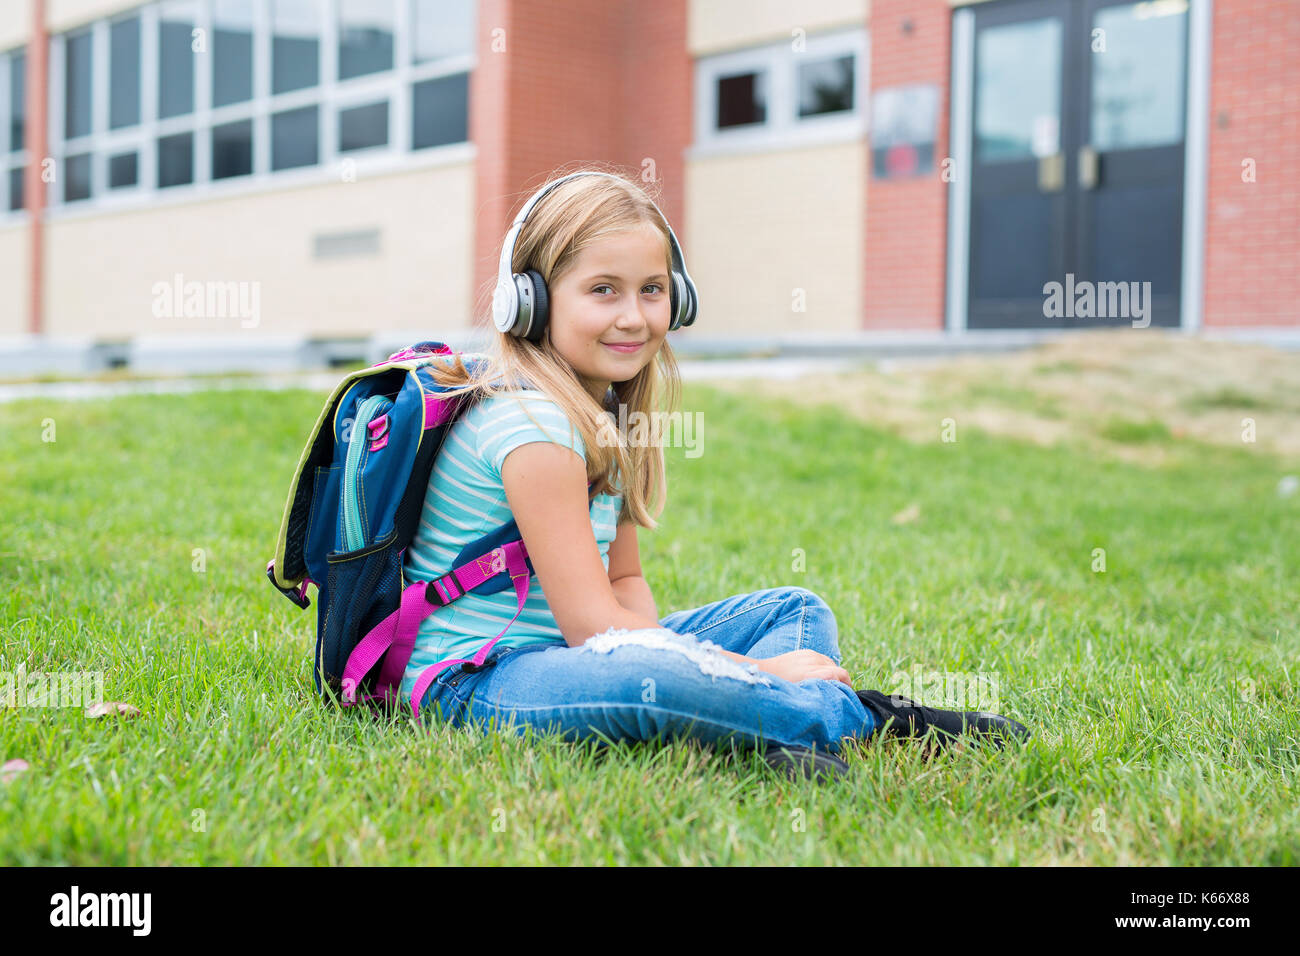 nine years old girl student at school Stock Photo